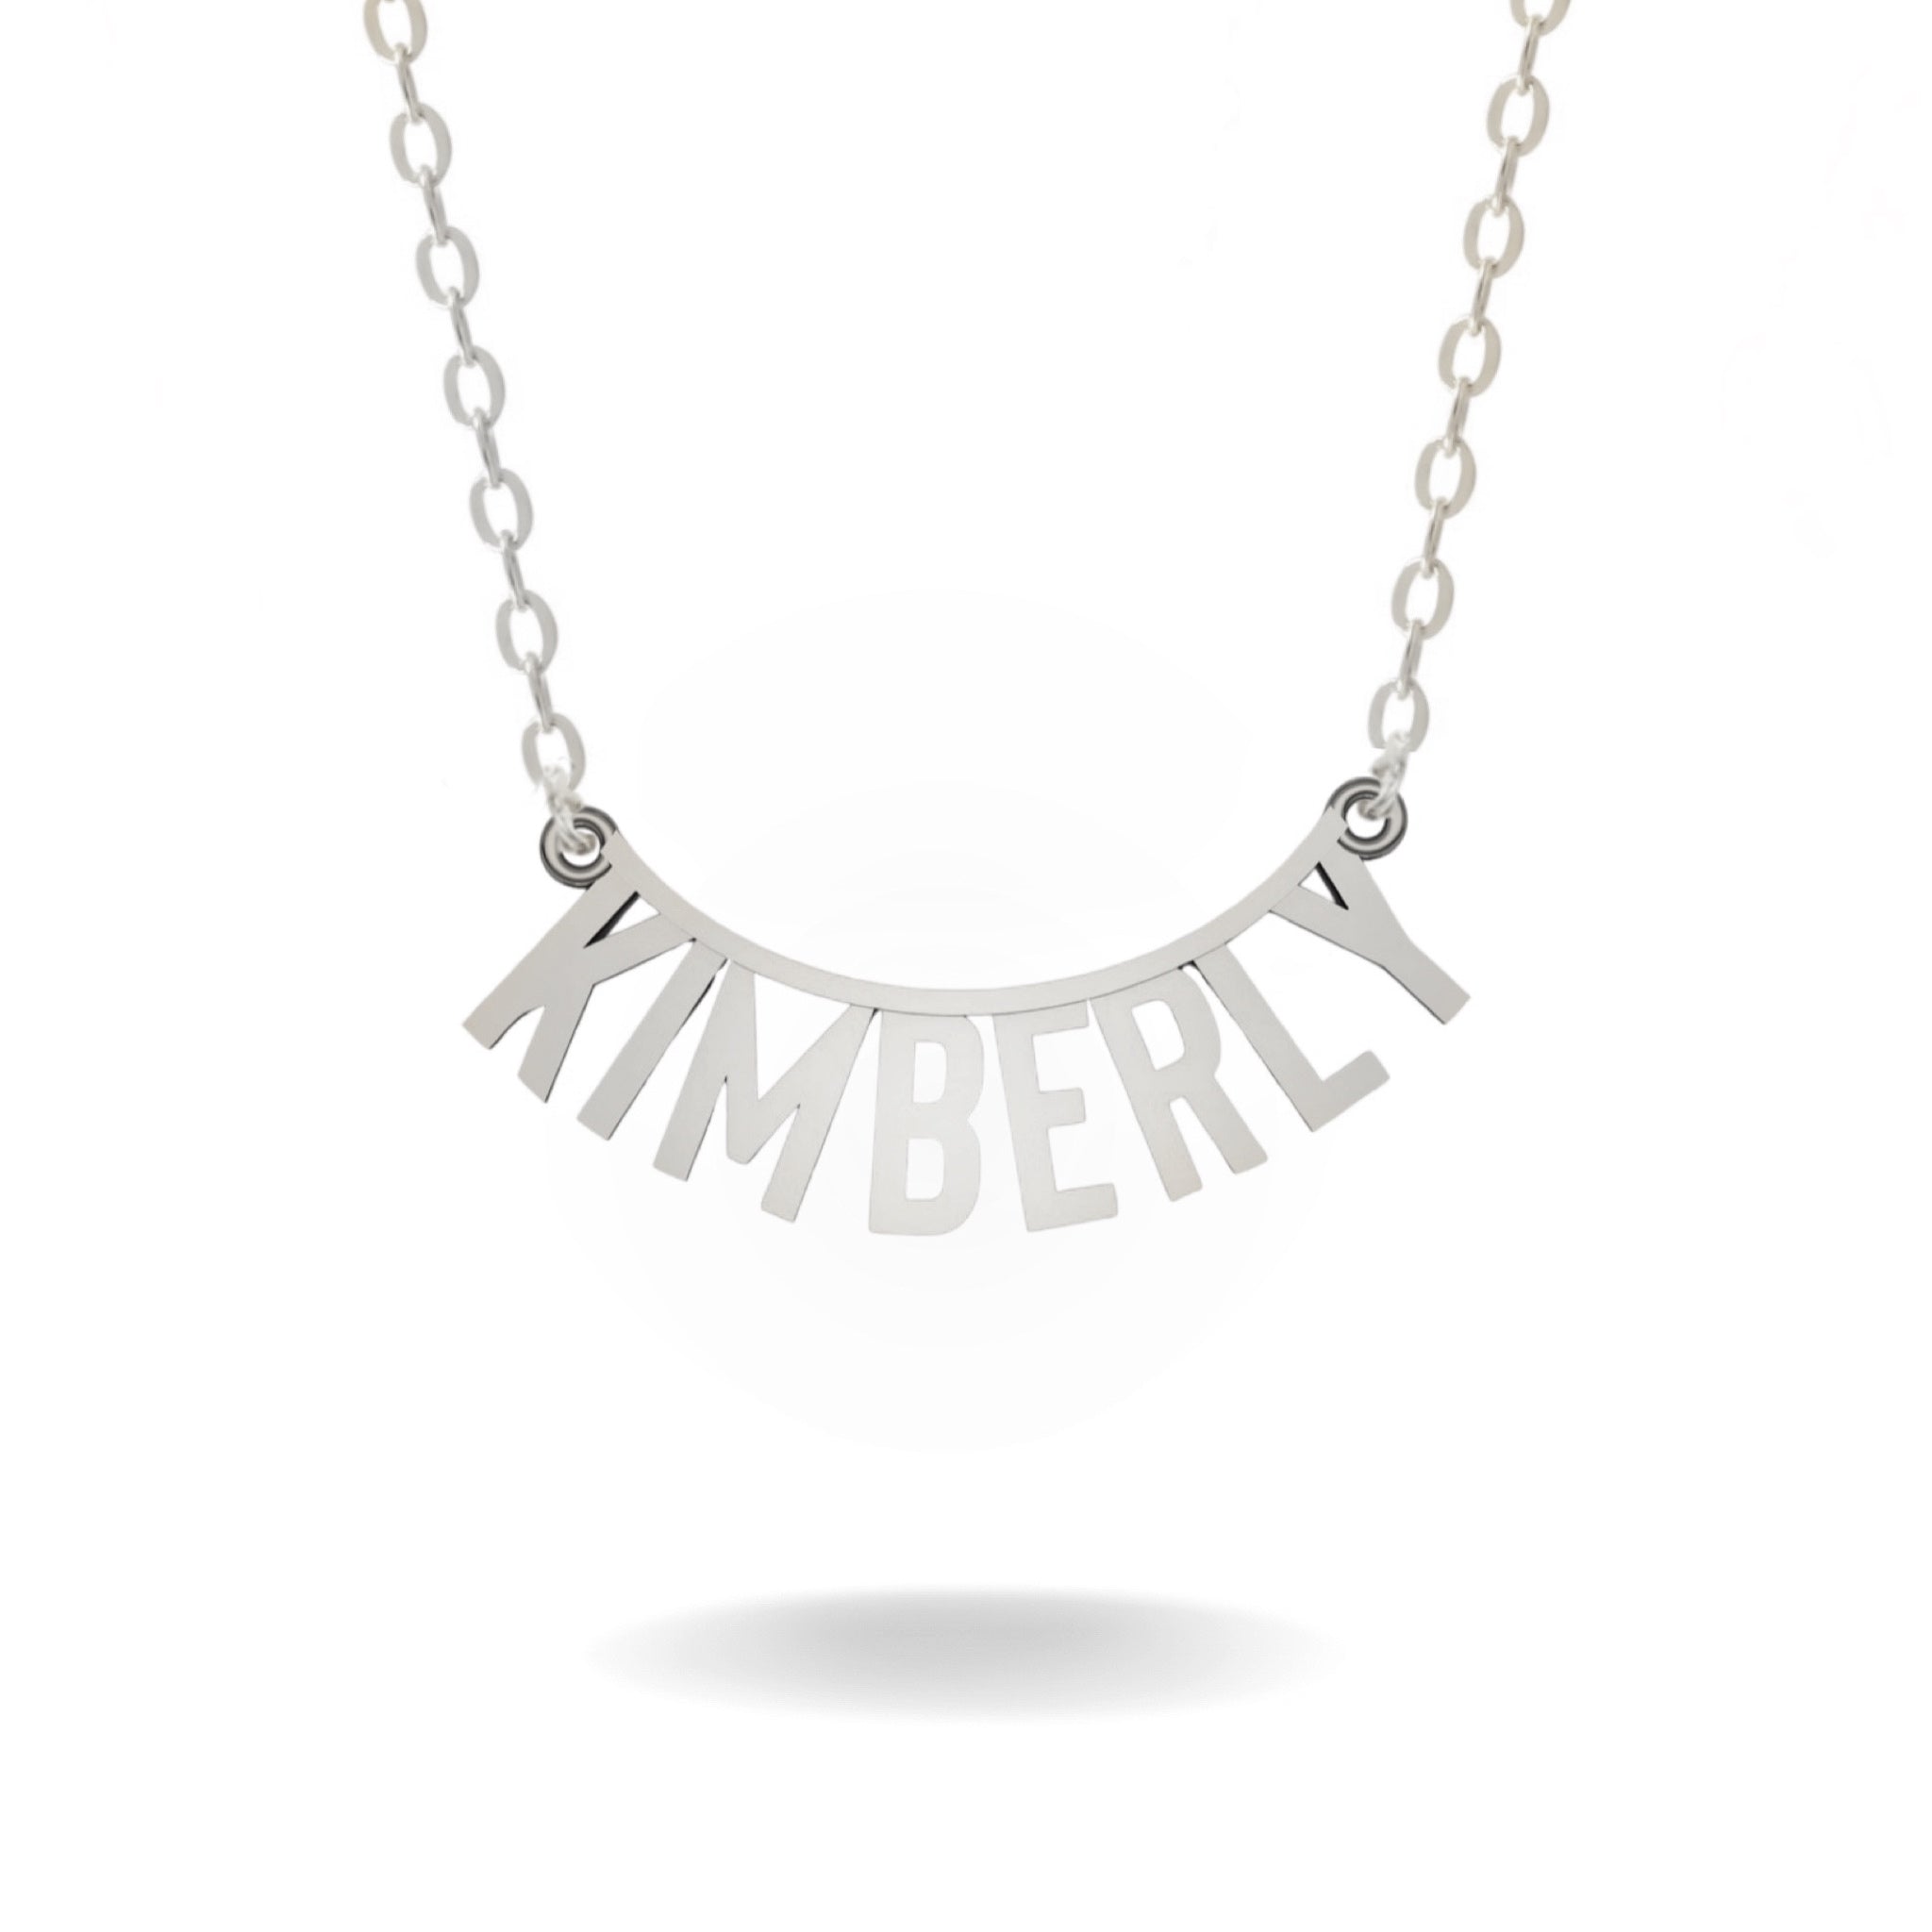 14K WHITE GOLD CURVED NAME NECKLACE